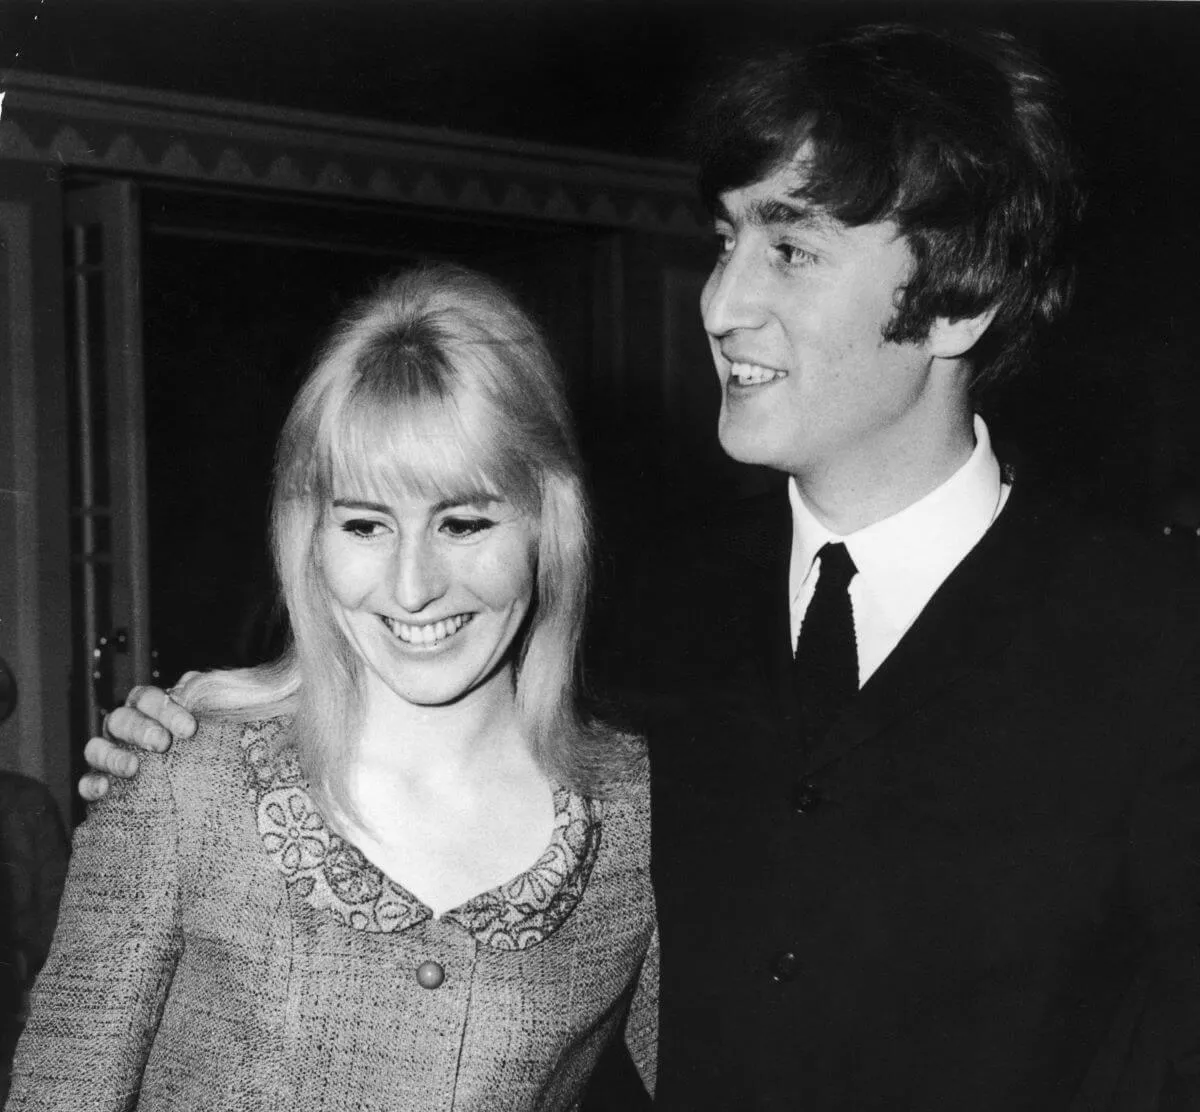 A black and white picture of John Lennon wearing a suit and standing with his arm around Cynthia Lennon's shoulders.